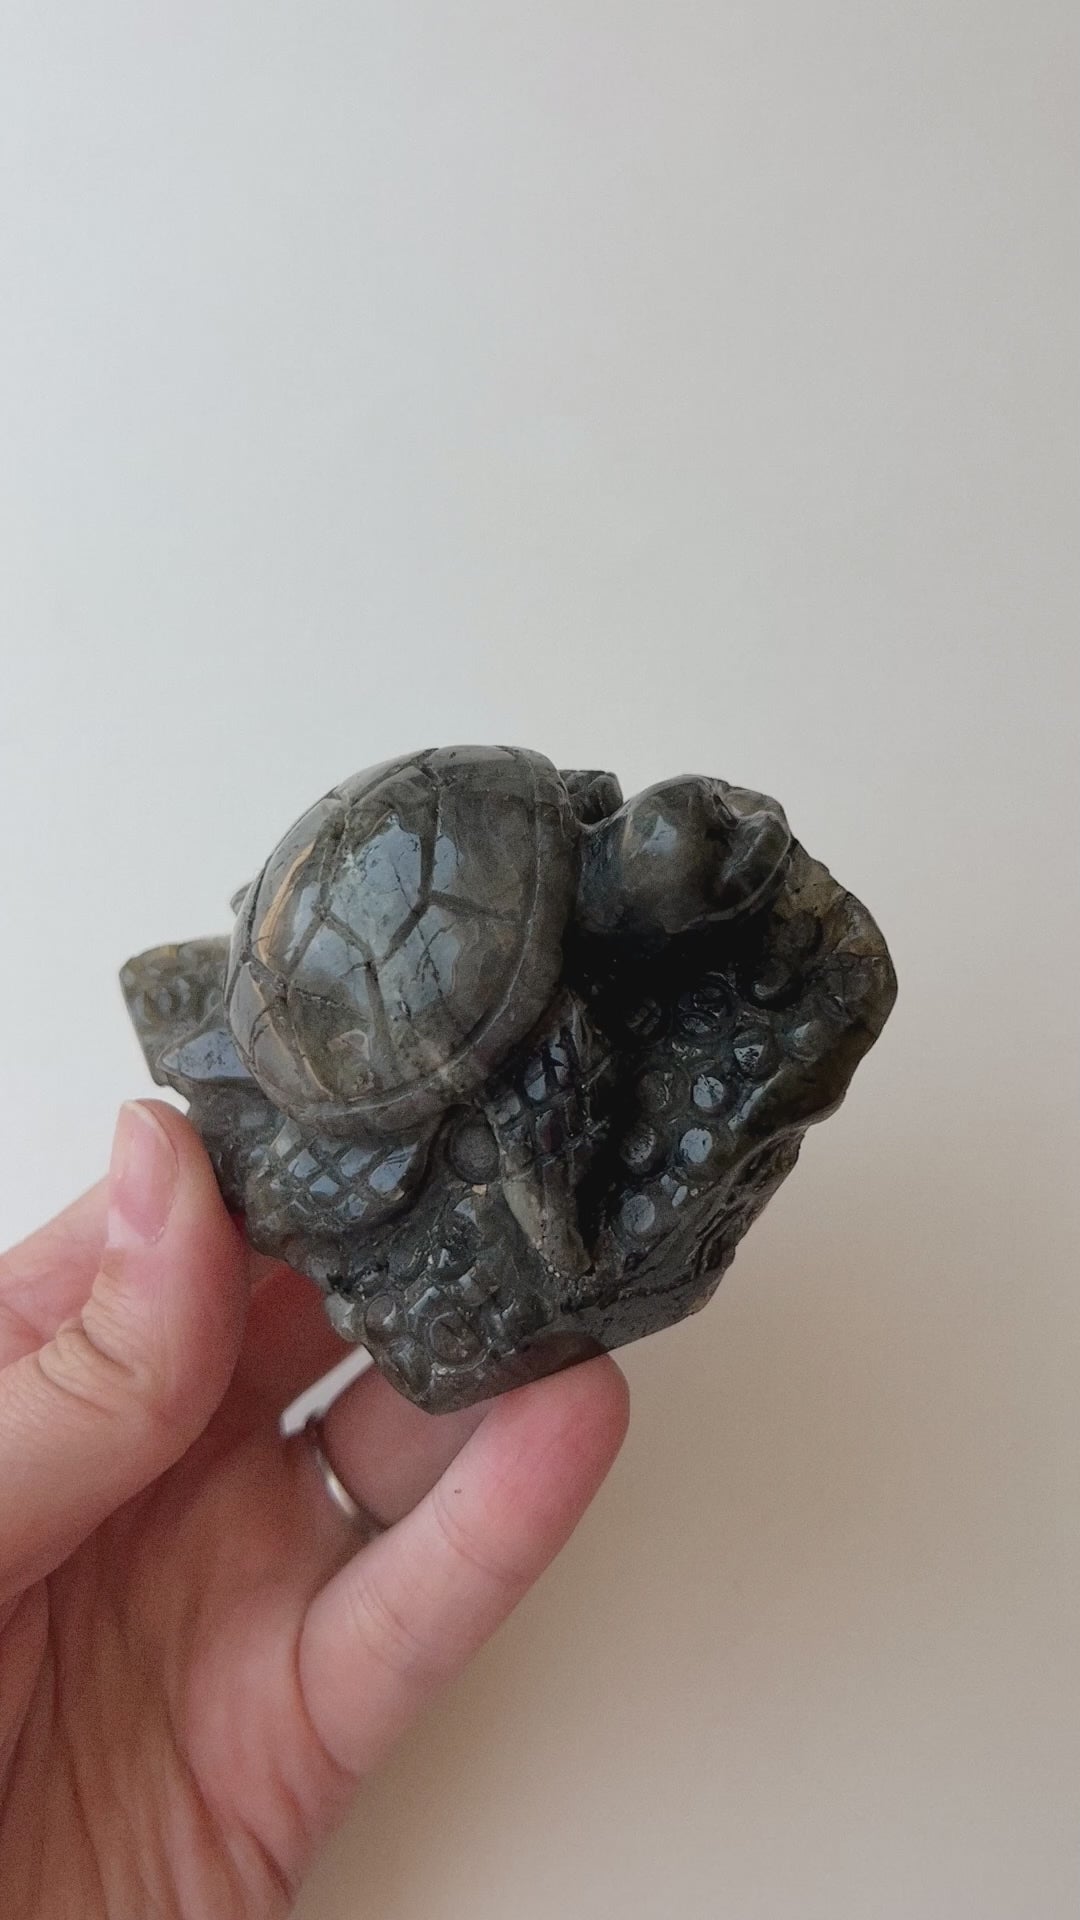 Crystal Turtle Carving